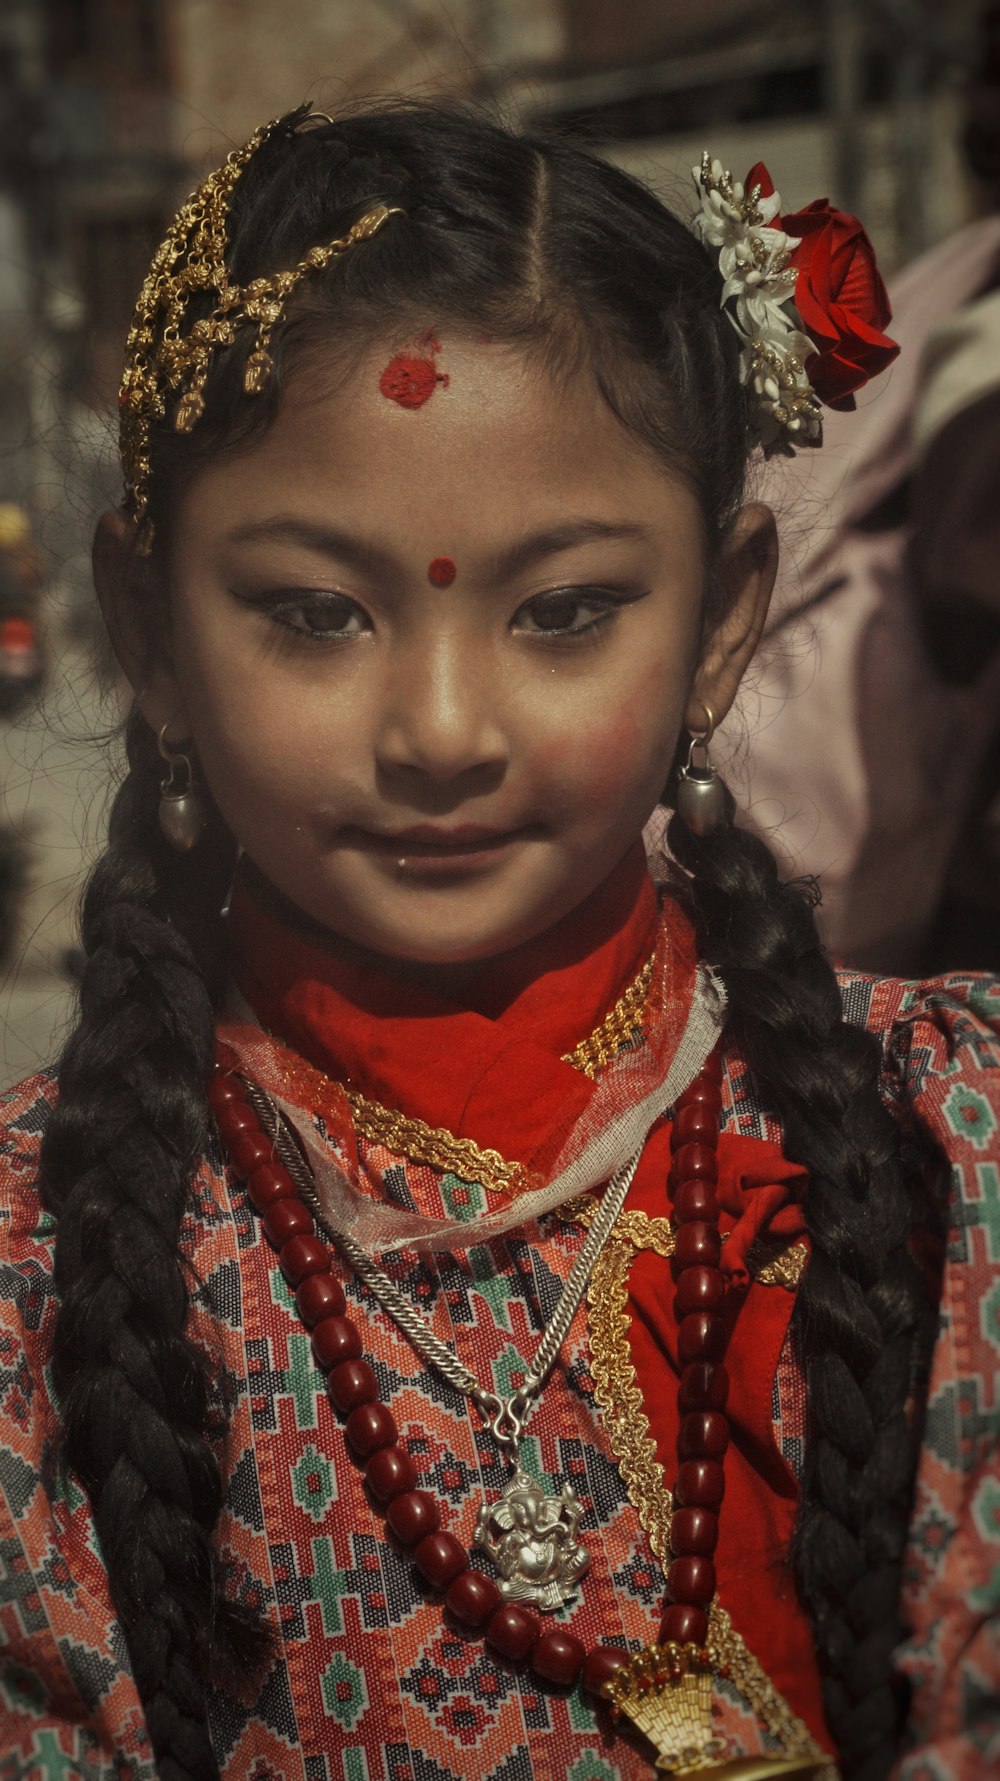 a young girl with braids and a red dress